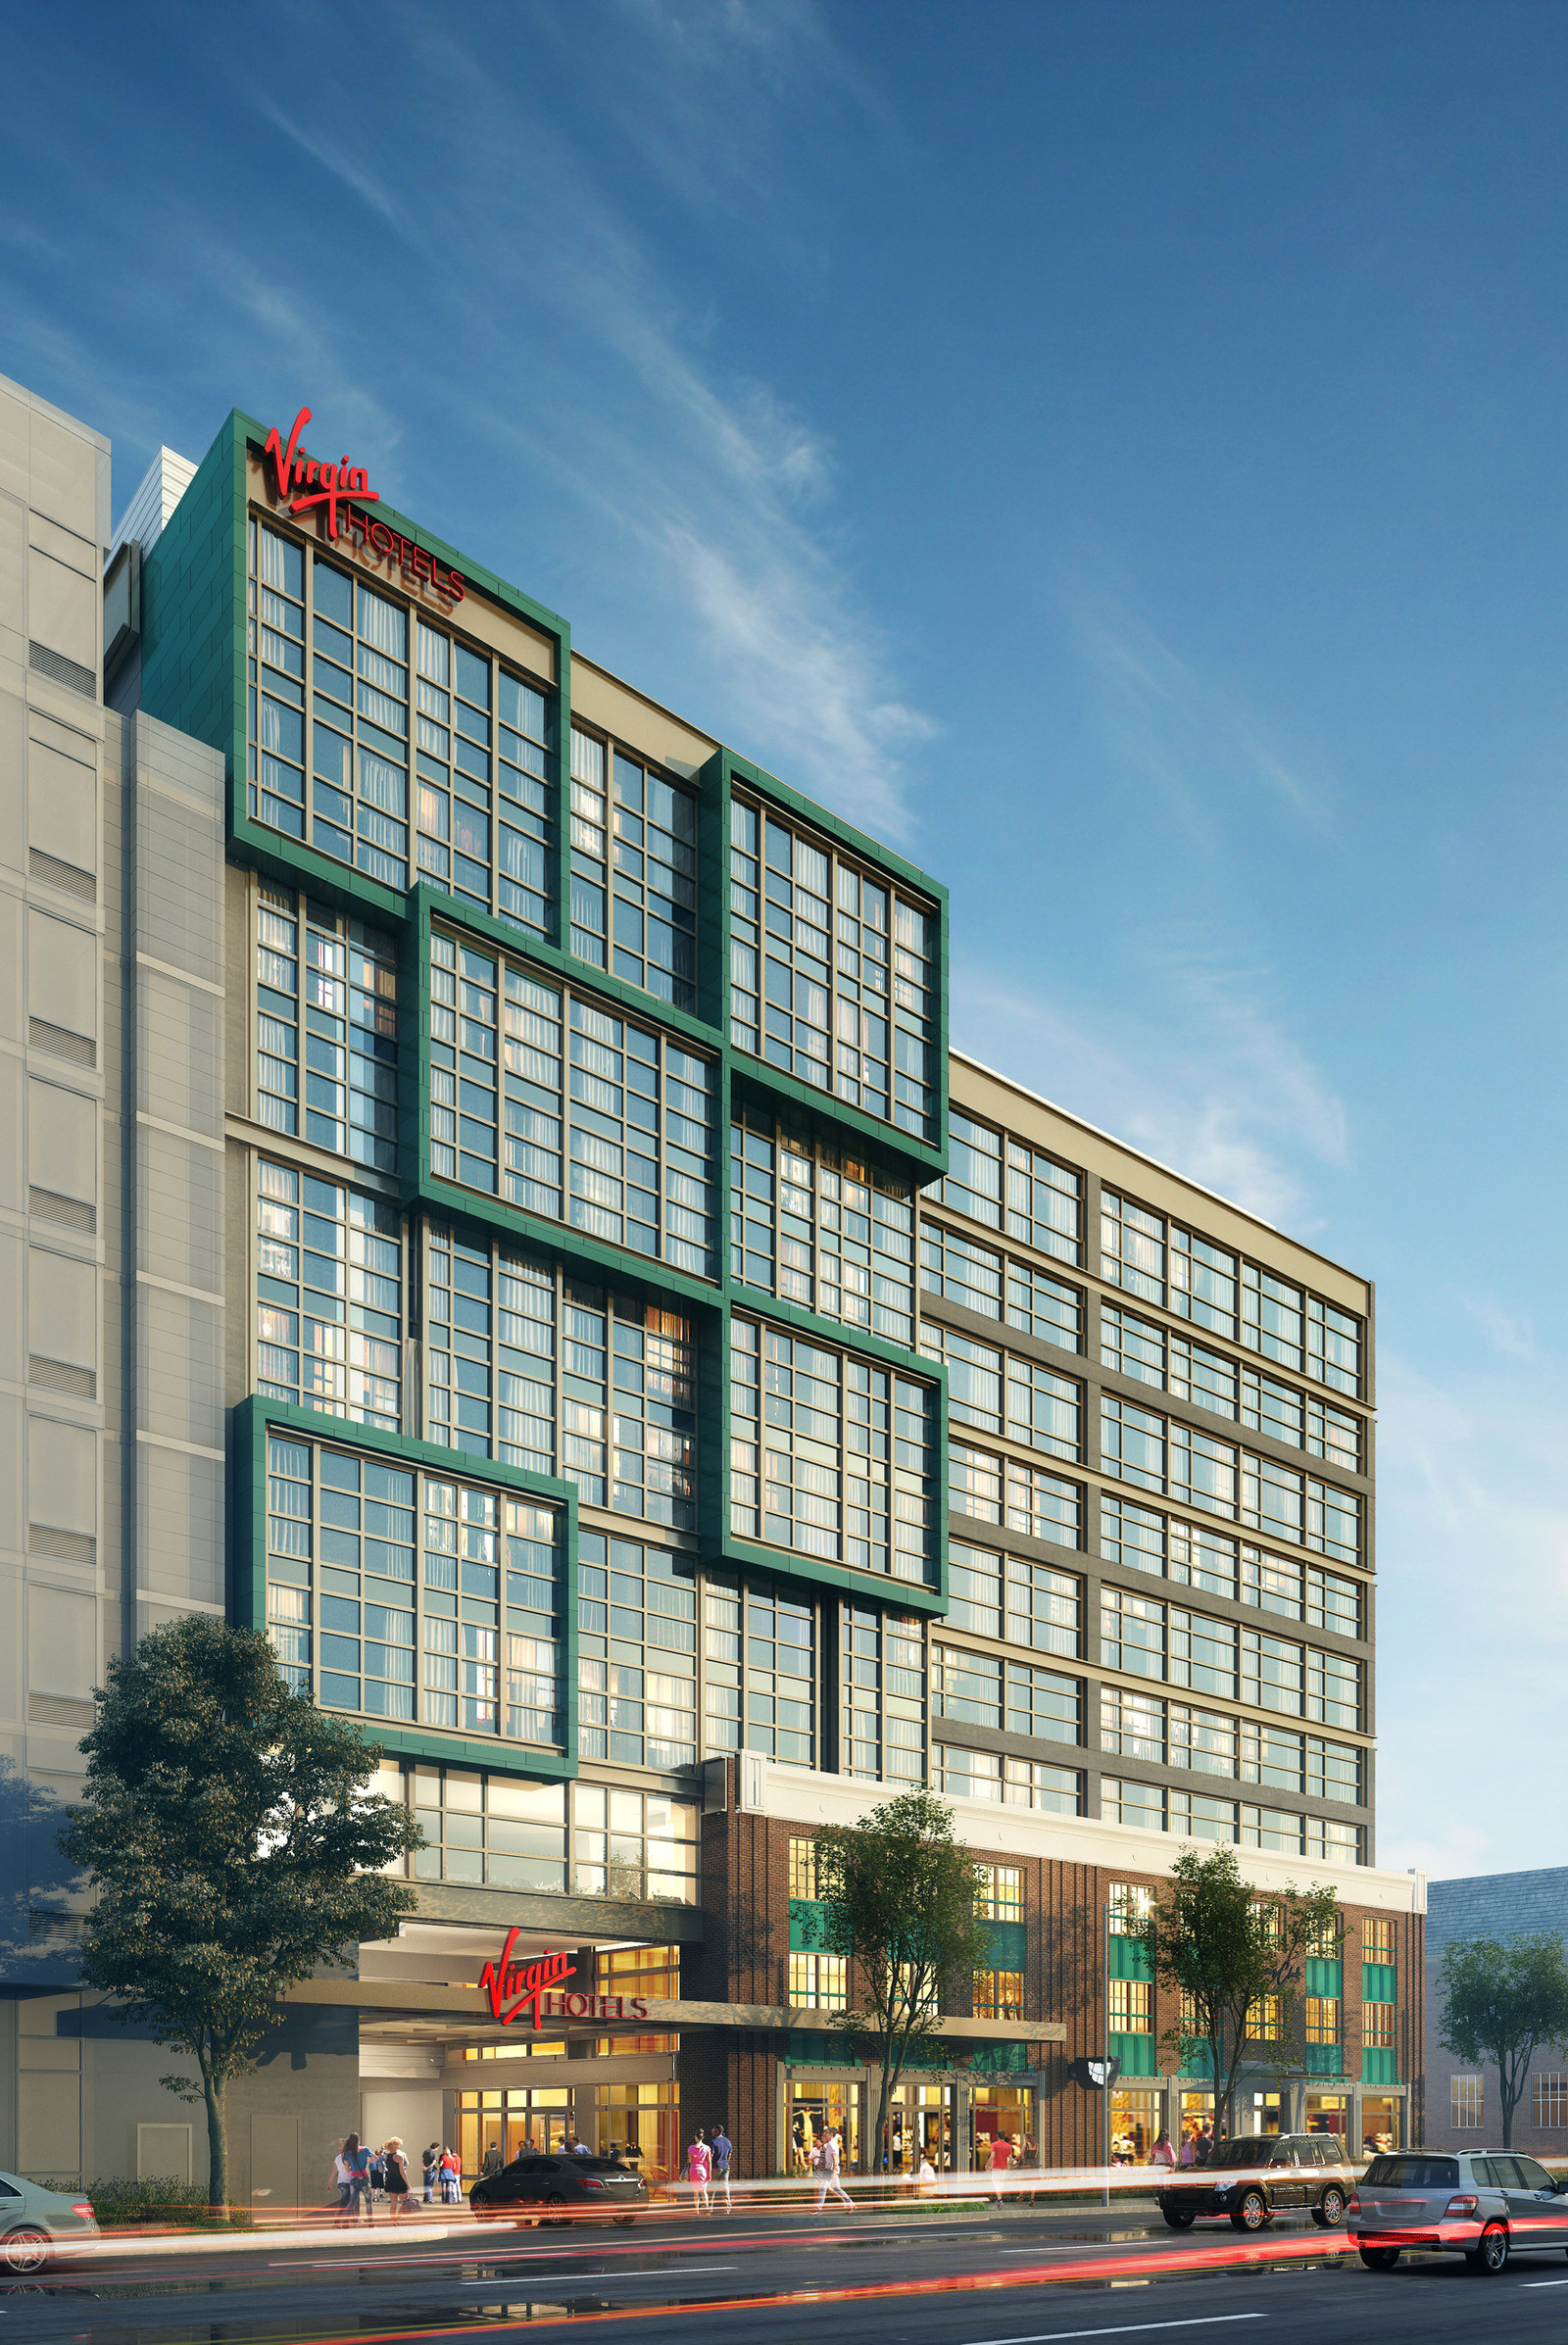 The hotel is expected to open near Union Market and is being developed as part of a partnership between DB Lee Development